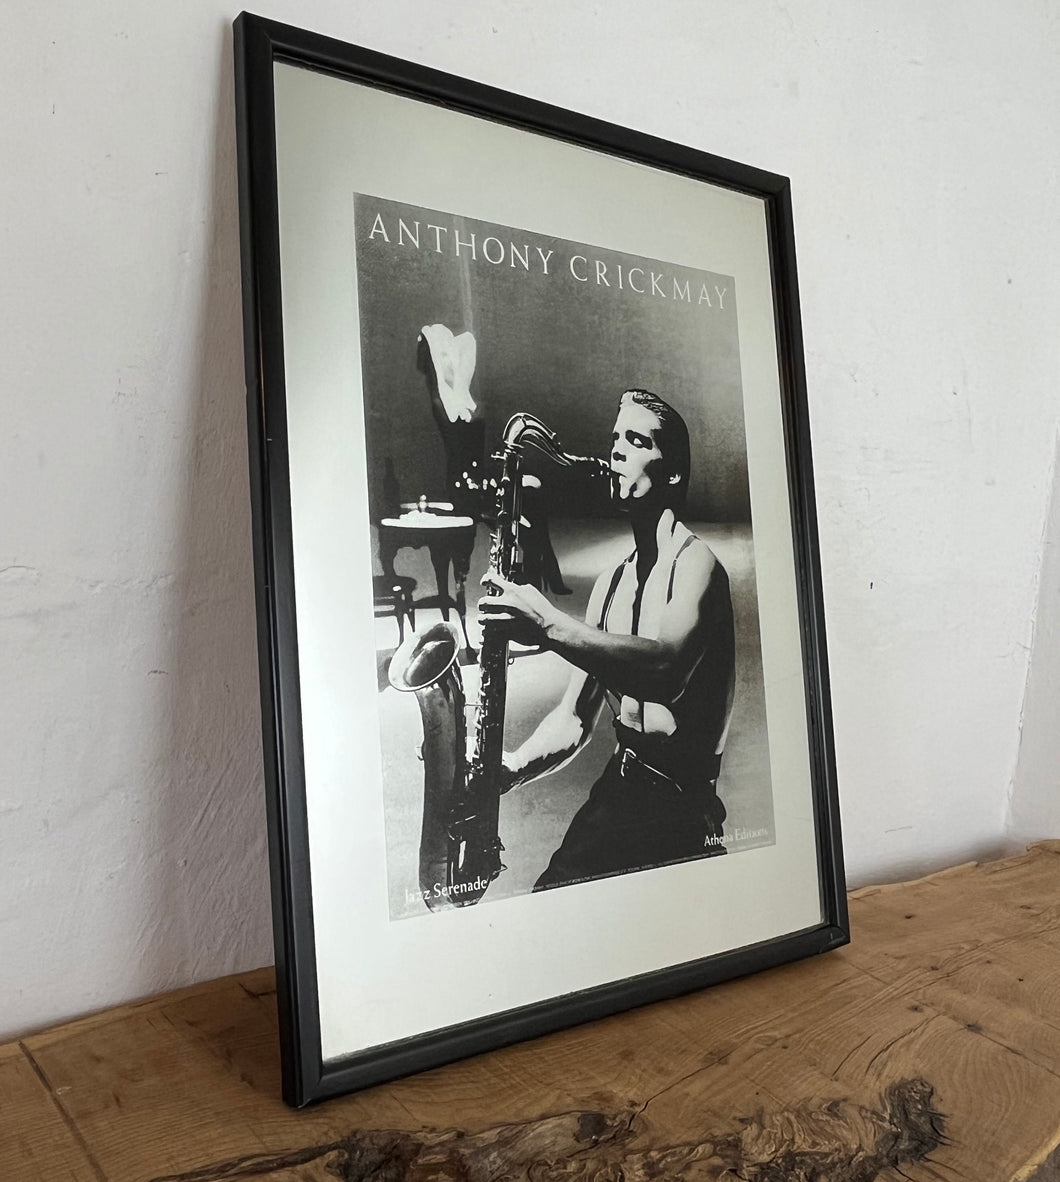 Stunning vibrant Jazz Serenade by Anthony Crickmay's vintage mirror was one of several atmospheric black and white posters published by the commercial company Athena.